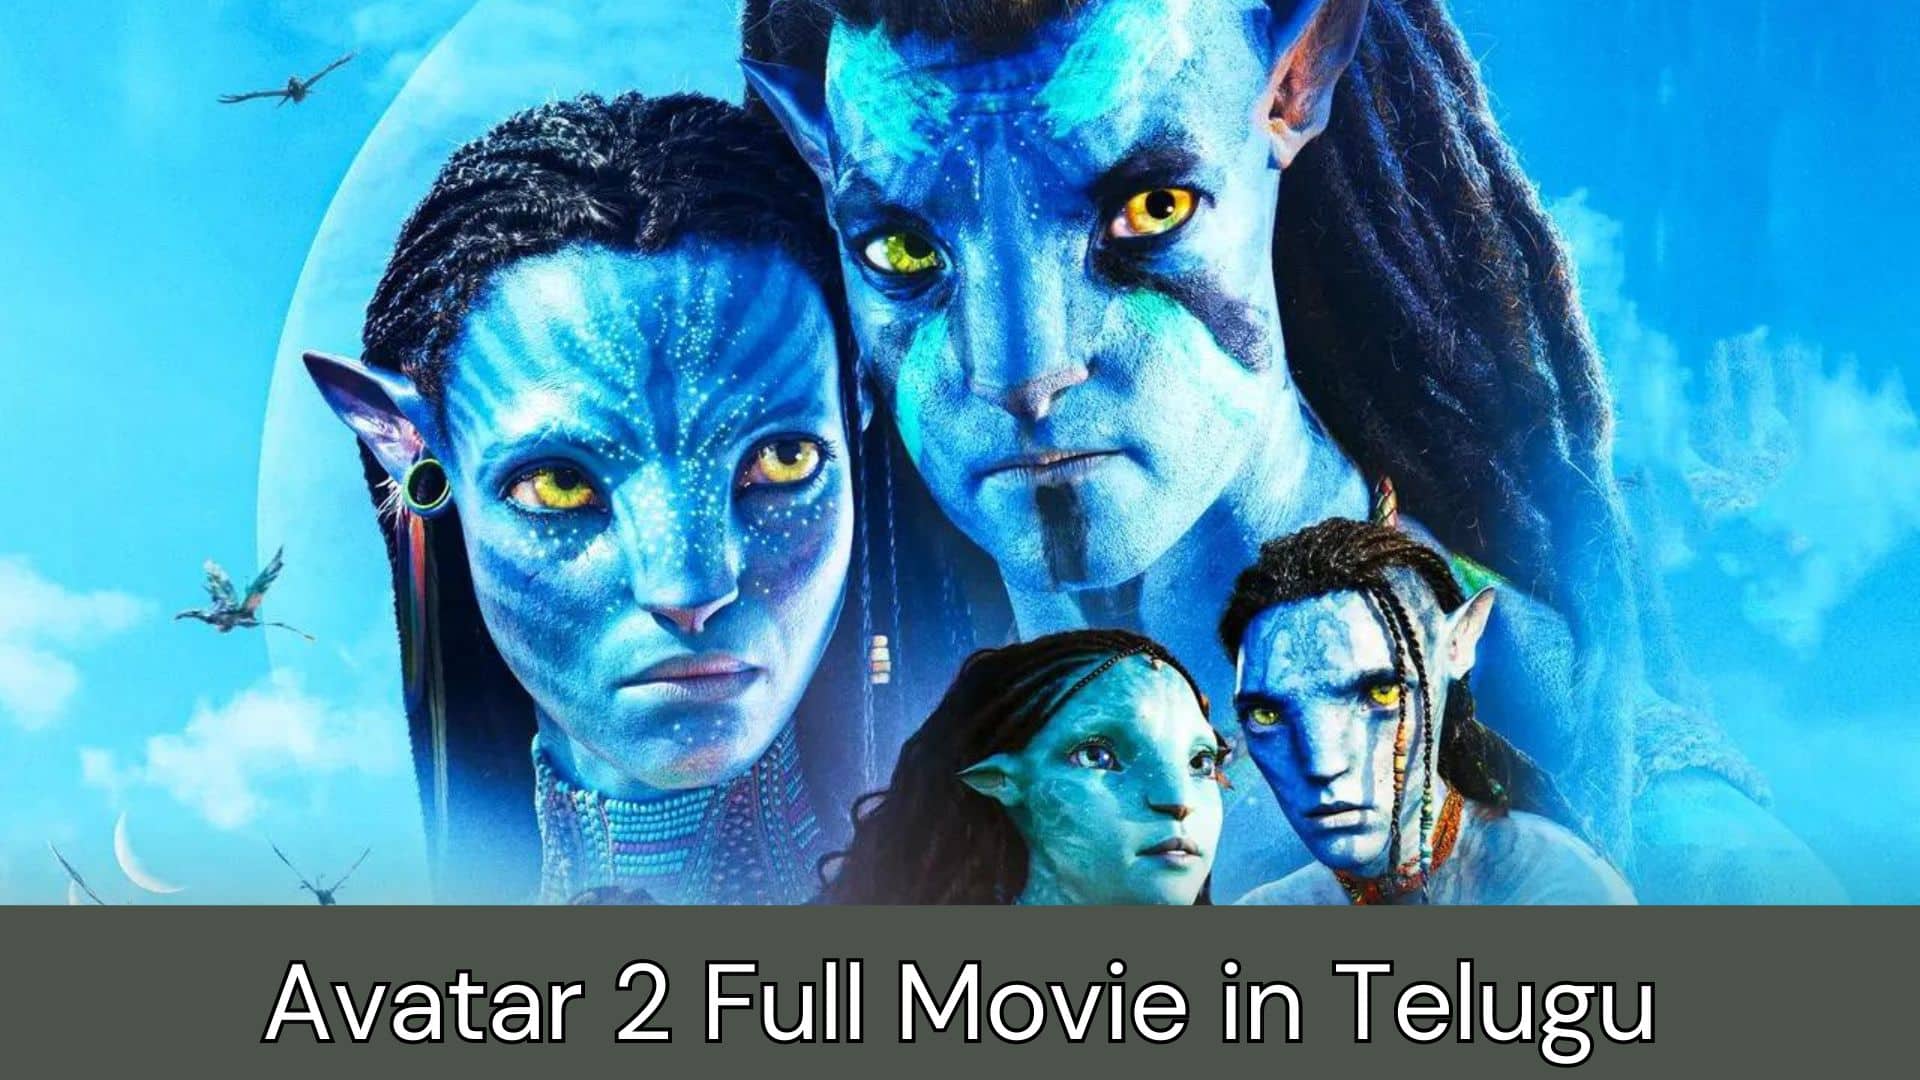 Avatar 2 Full Movie Length, Cast, Budget, Theater, Poster, Release Date, Collection, Rating